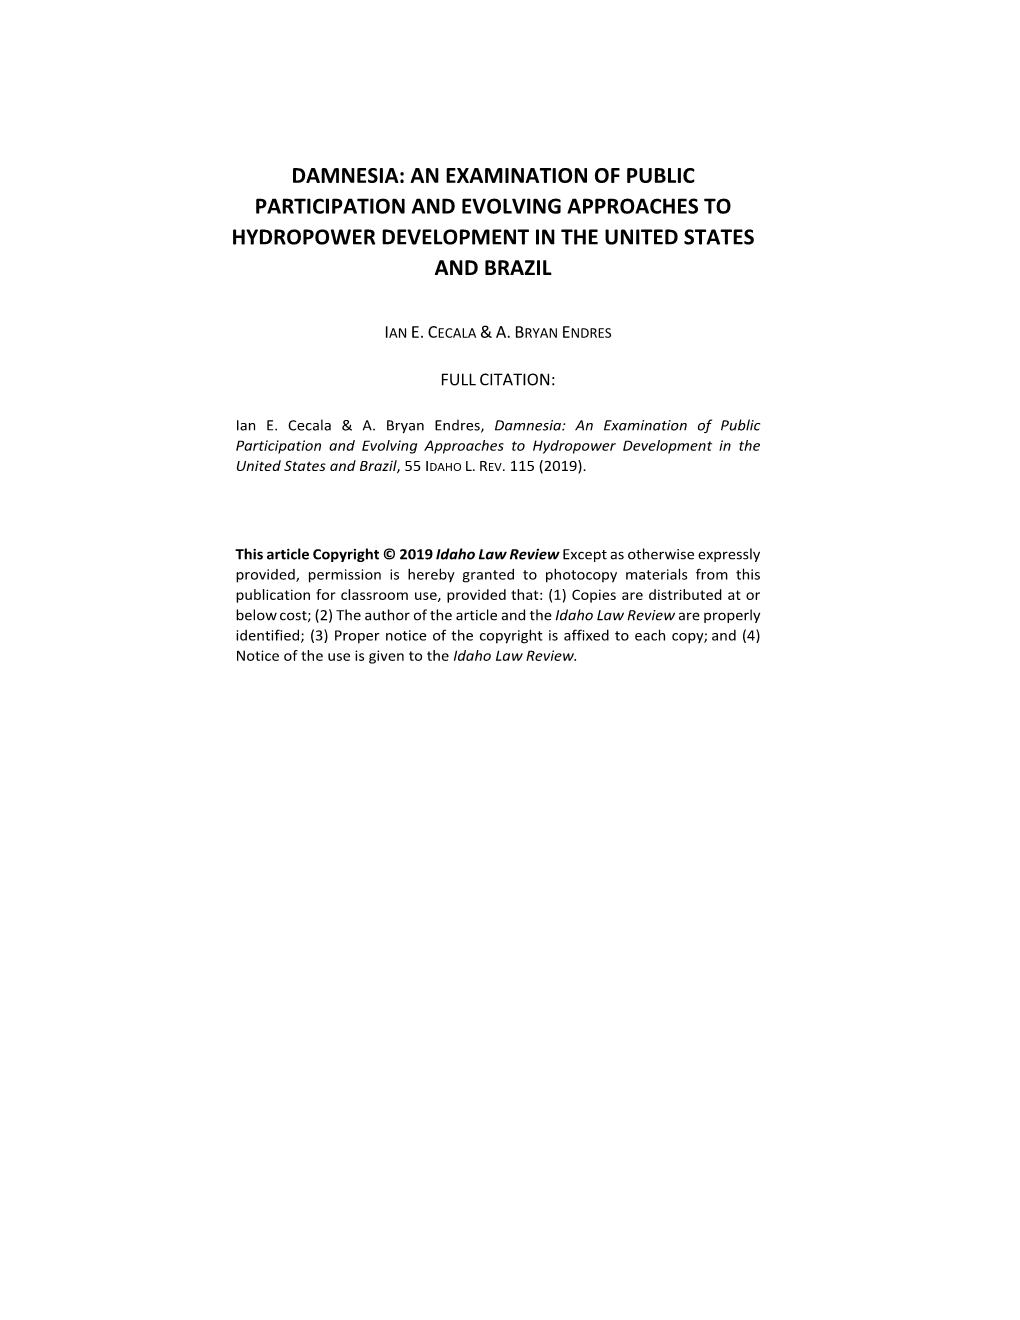 Damnesia: an Examination of Public Participation and Evolving Approaches to Hydropower Development in the United States and Brazil